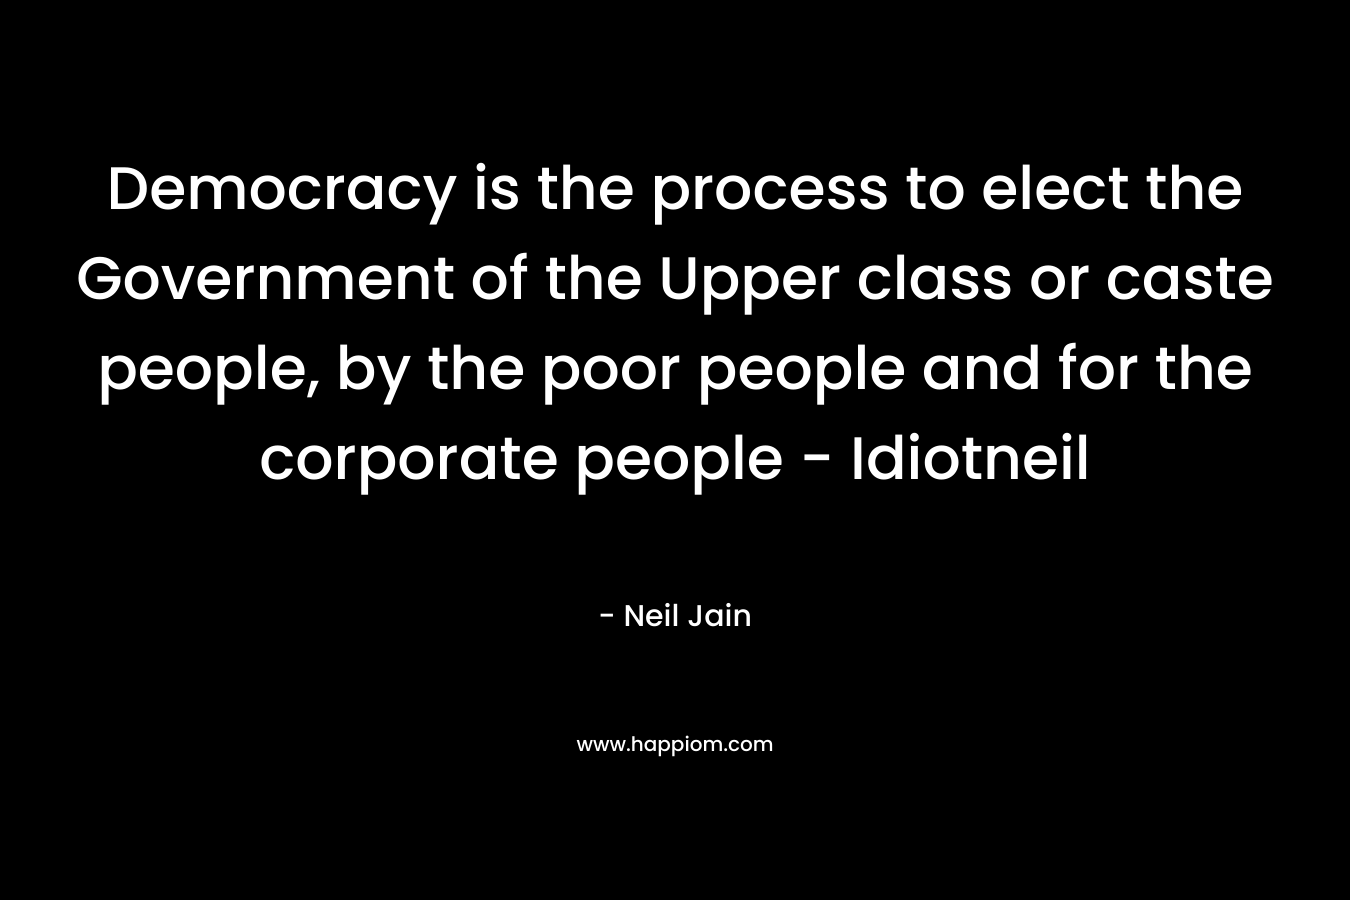 Democracy is the process to elect the Government of the Upper class or caste people, by the poor people and for the corporate people - Idiotneil